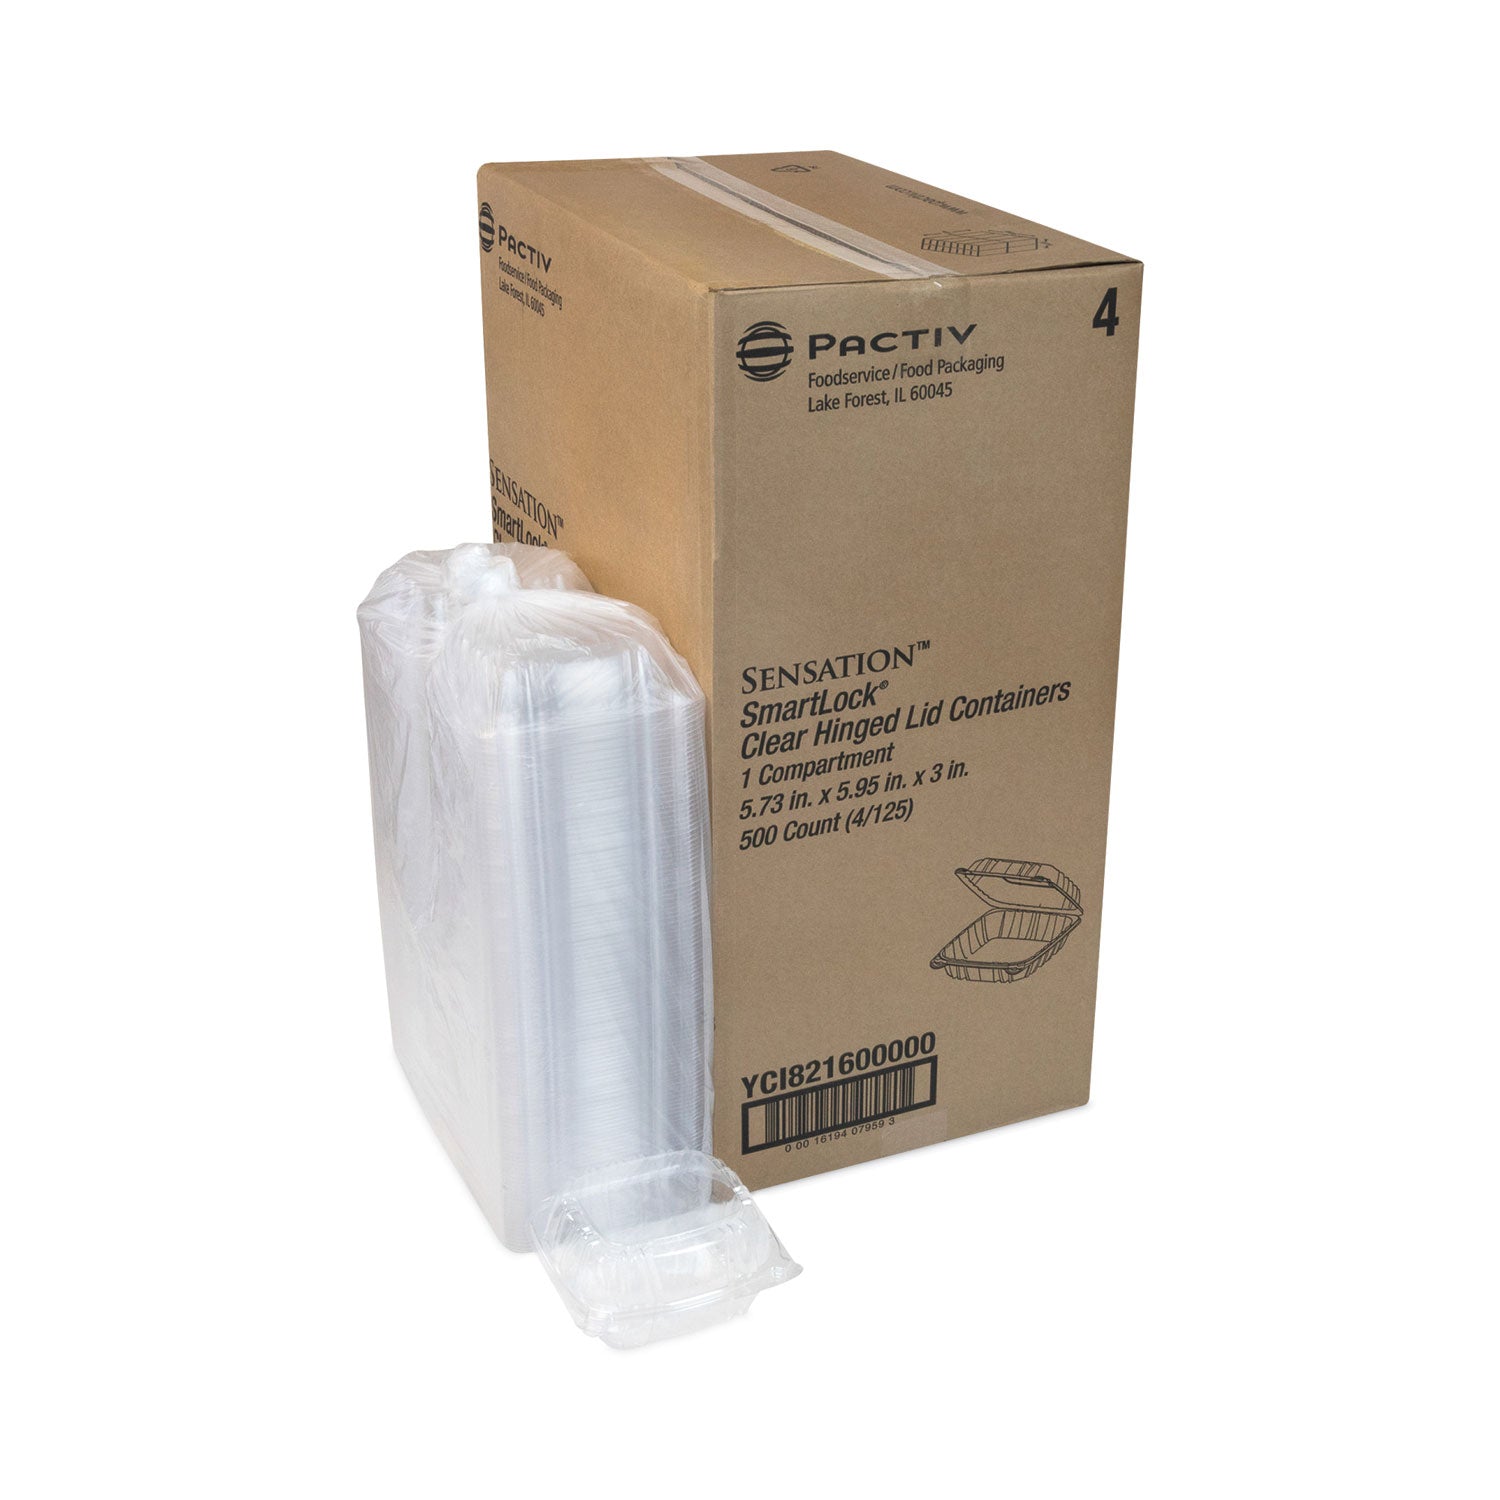 sensation-smartlock-hinged-lid-container-574-x-595-x-31-clear-plastic-500-carton_pctyci821600000 - 5